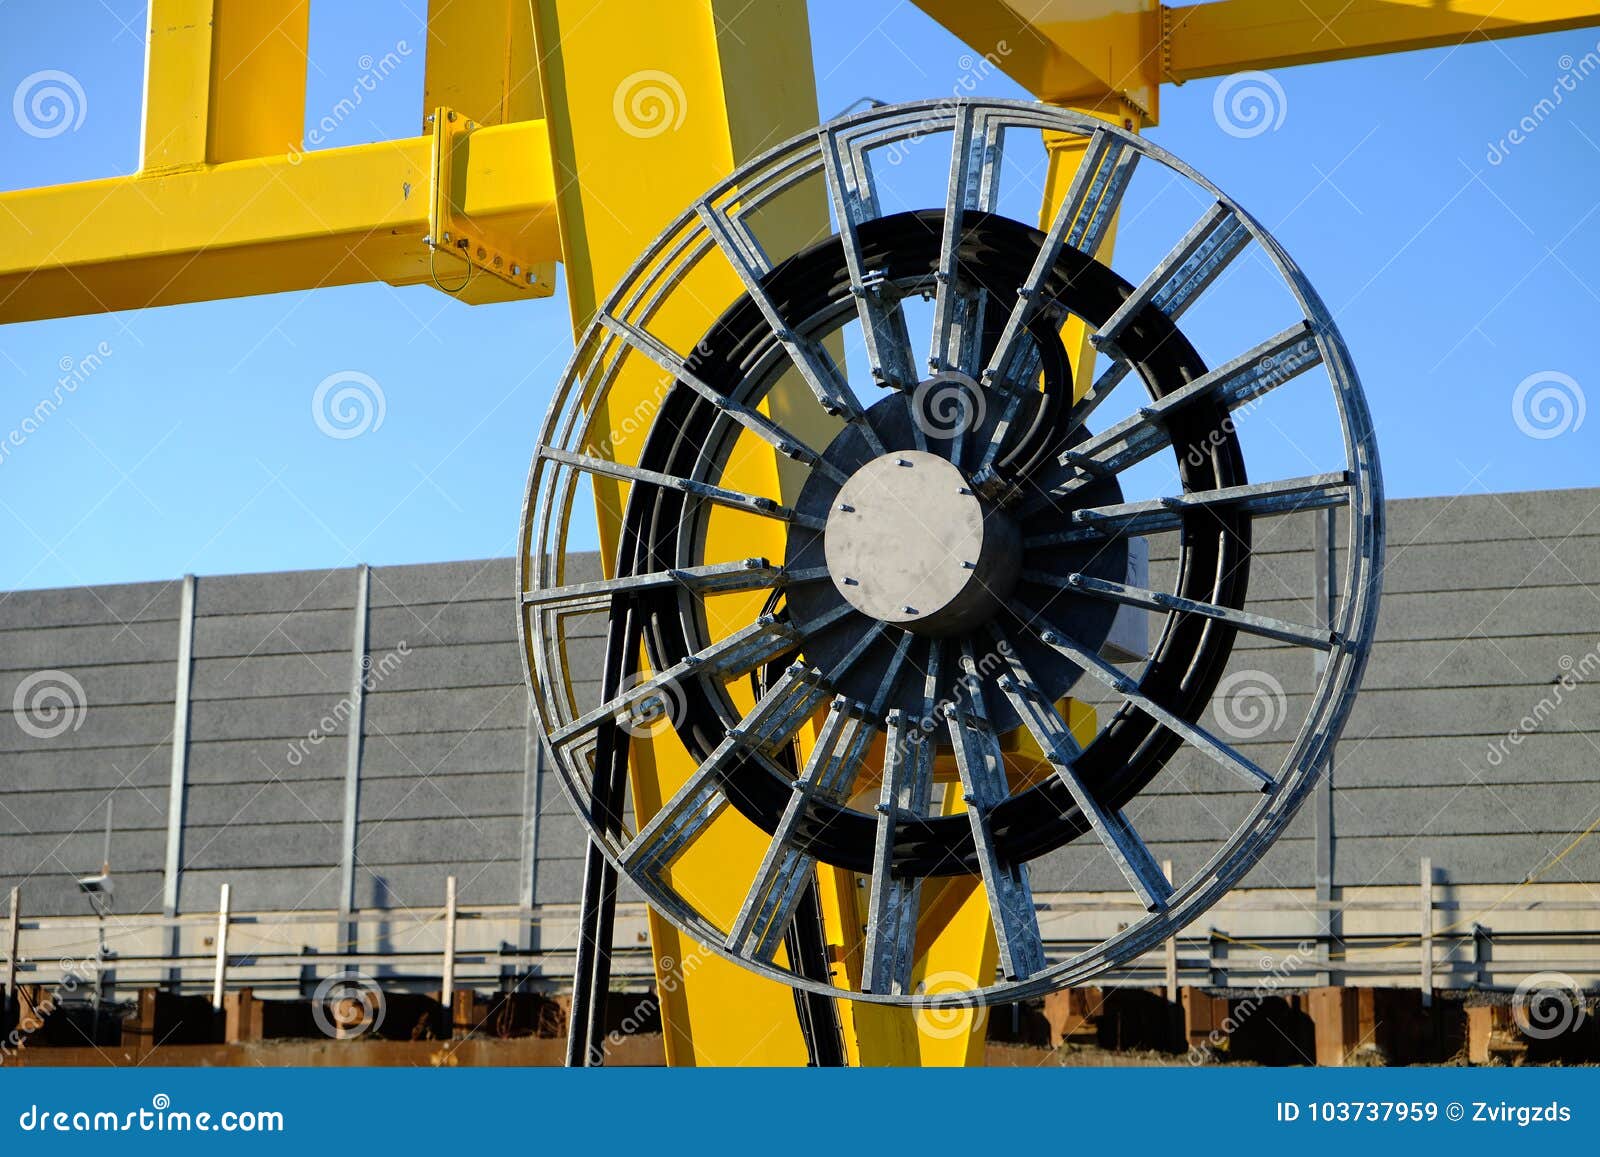 Large Cable Spool Under a Crane Stock Image - Image of energy, powerline:  103737959